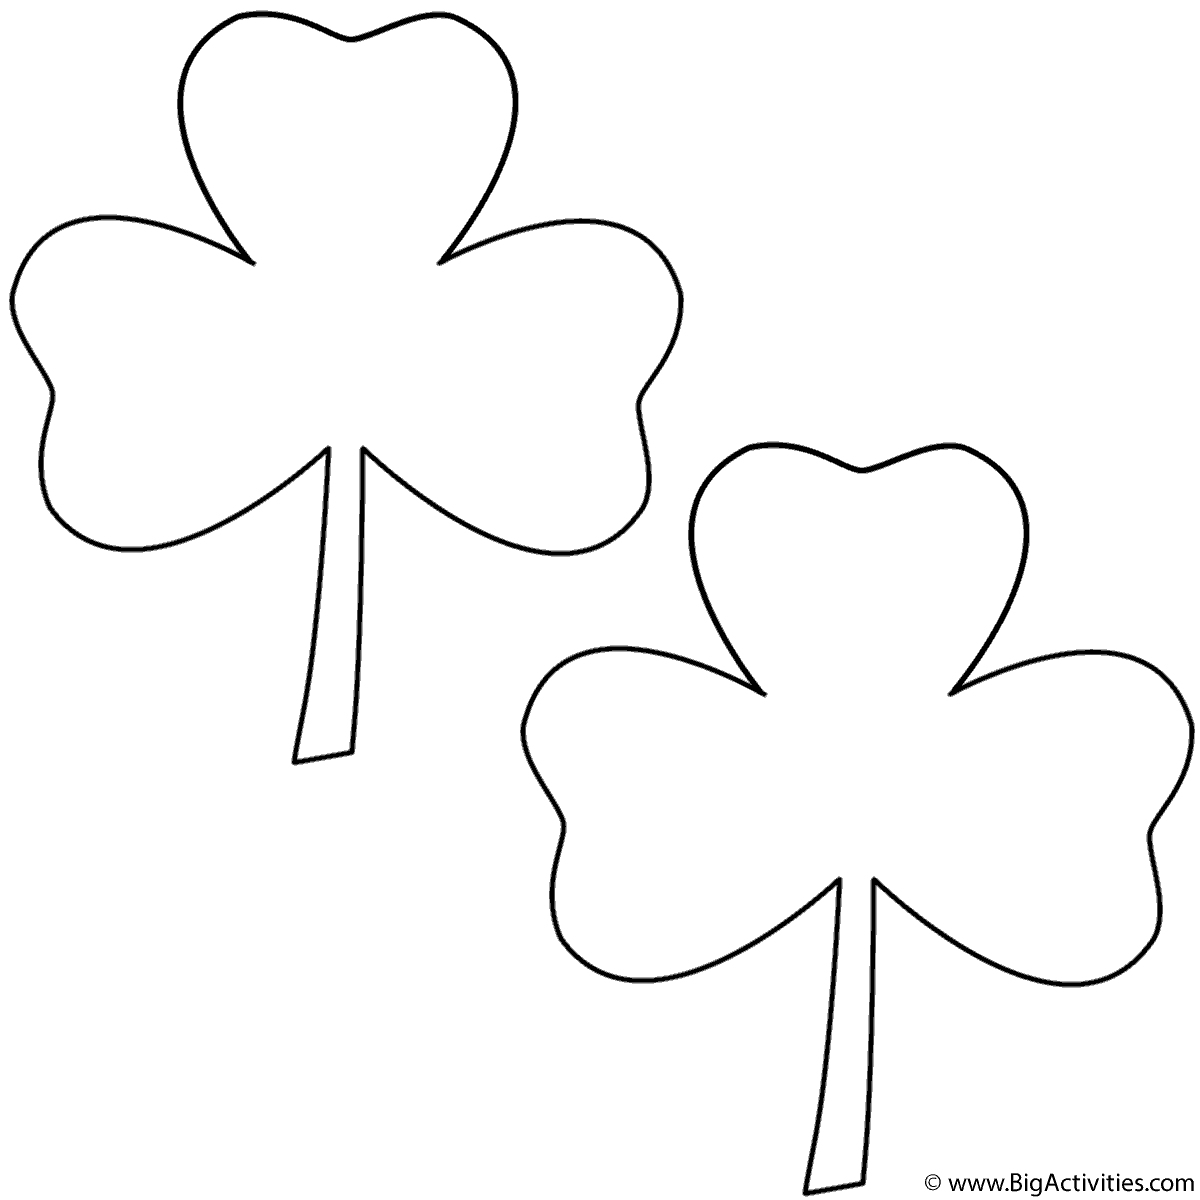 Three Leaf Clovers (2 clovers) Coloring Page (St. Patrick's Day)